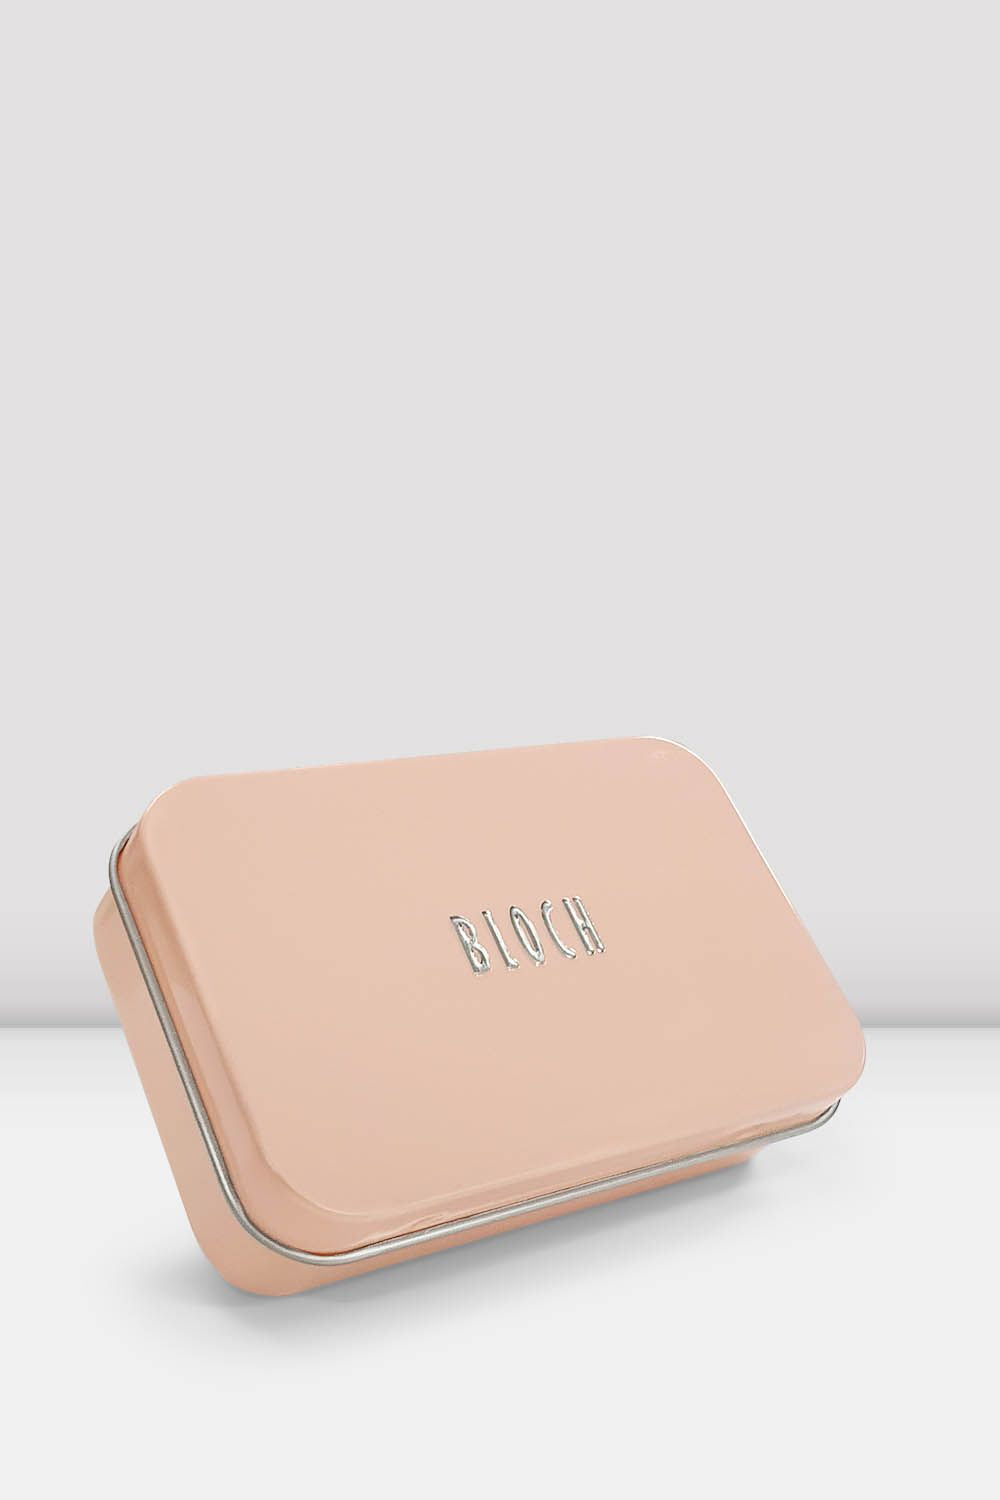 Bloch Stretch Sewing Kit - The Dance Shop